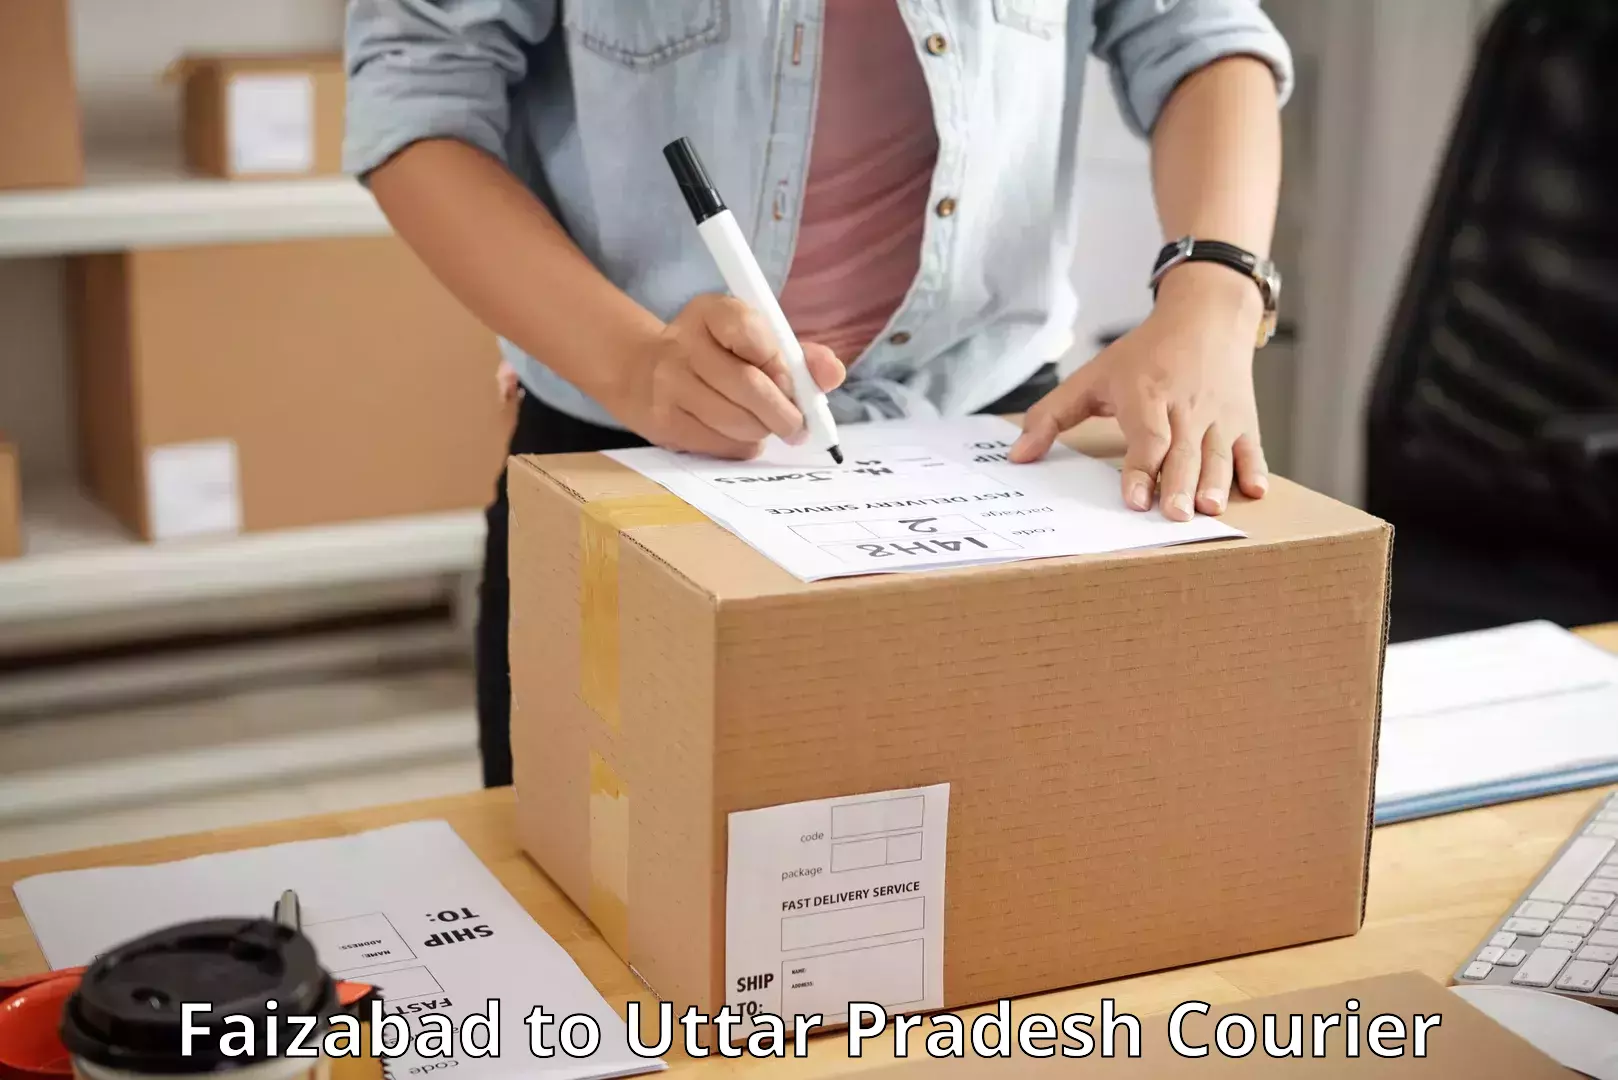 Subscription-based courier Faizabad to Maripeda